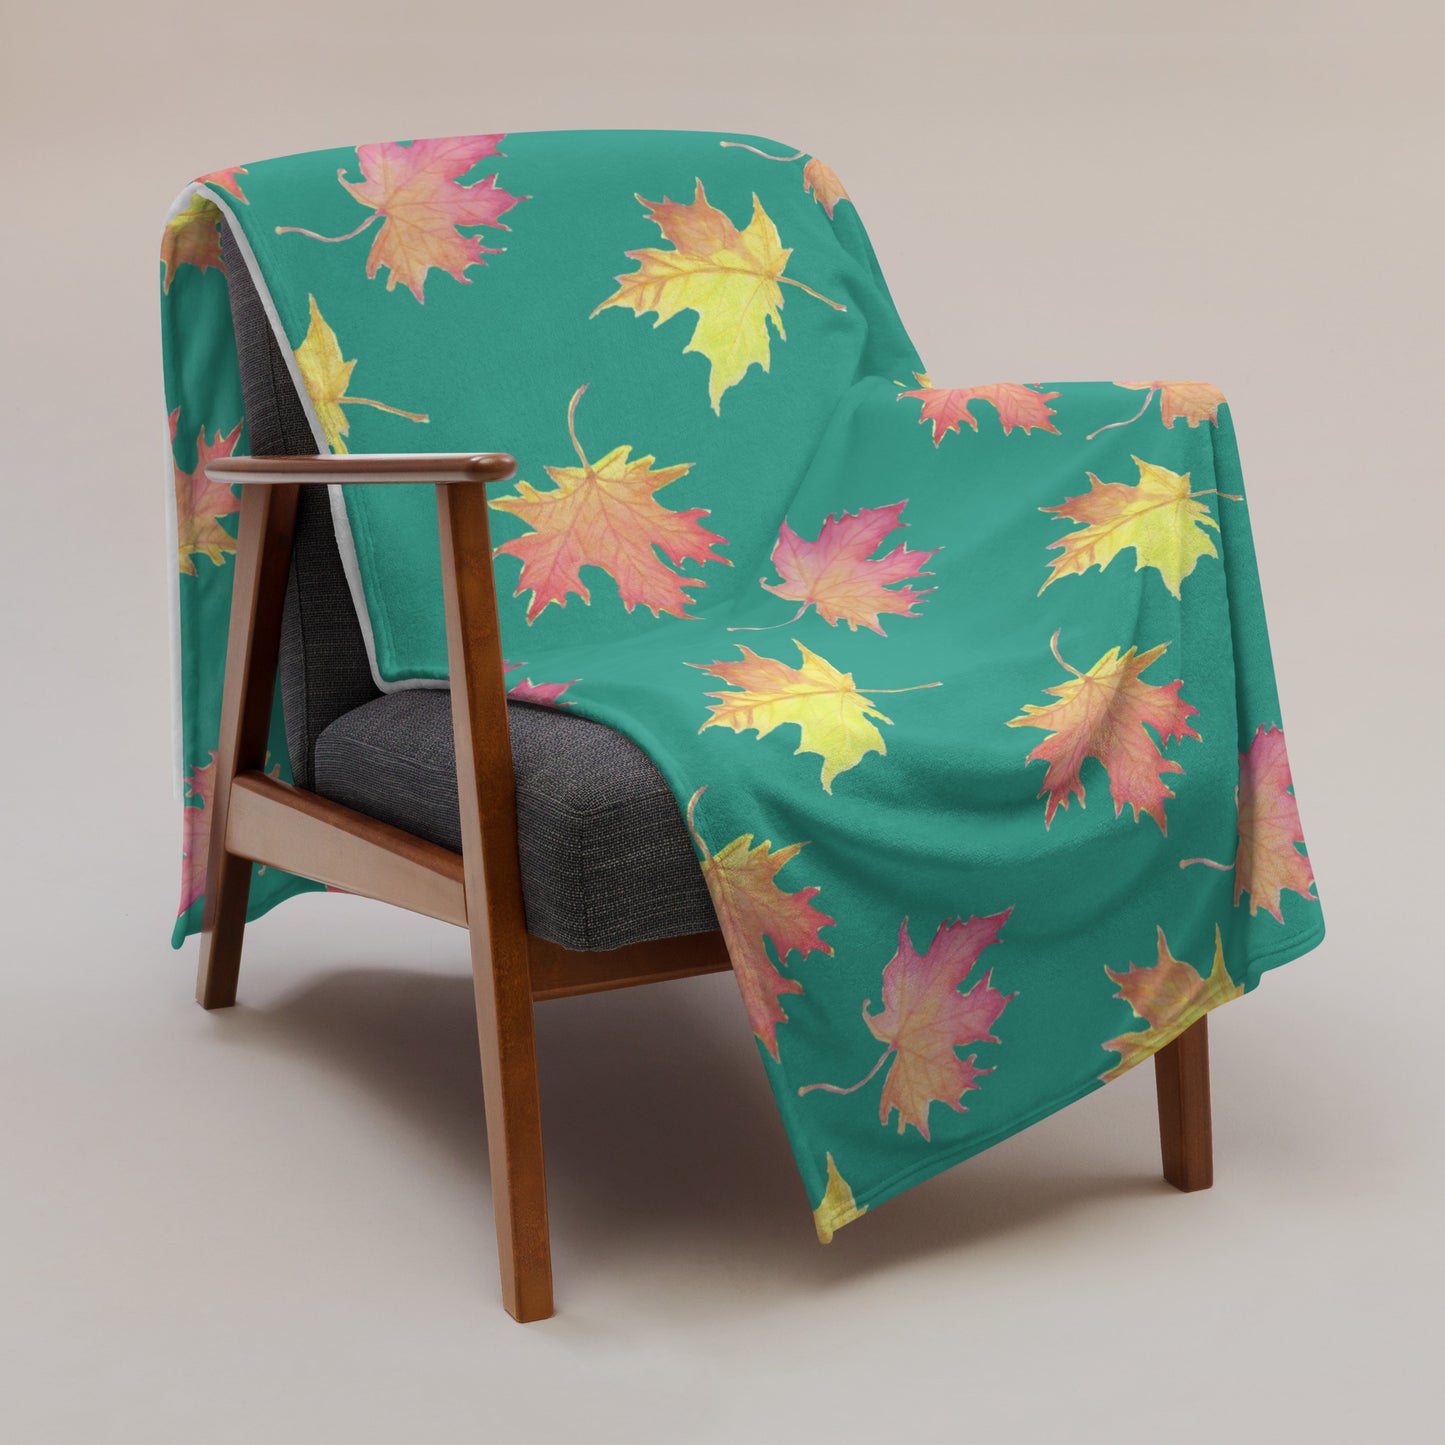 60 by 80 inch soft throw blanket featuring watercolor fall leaves patterned on a dark green background. Shown draped across a chair.